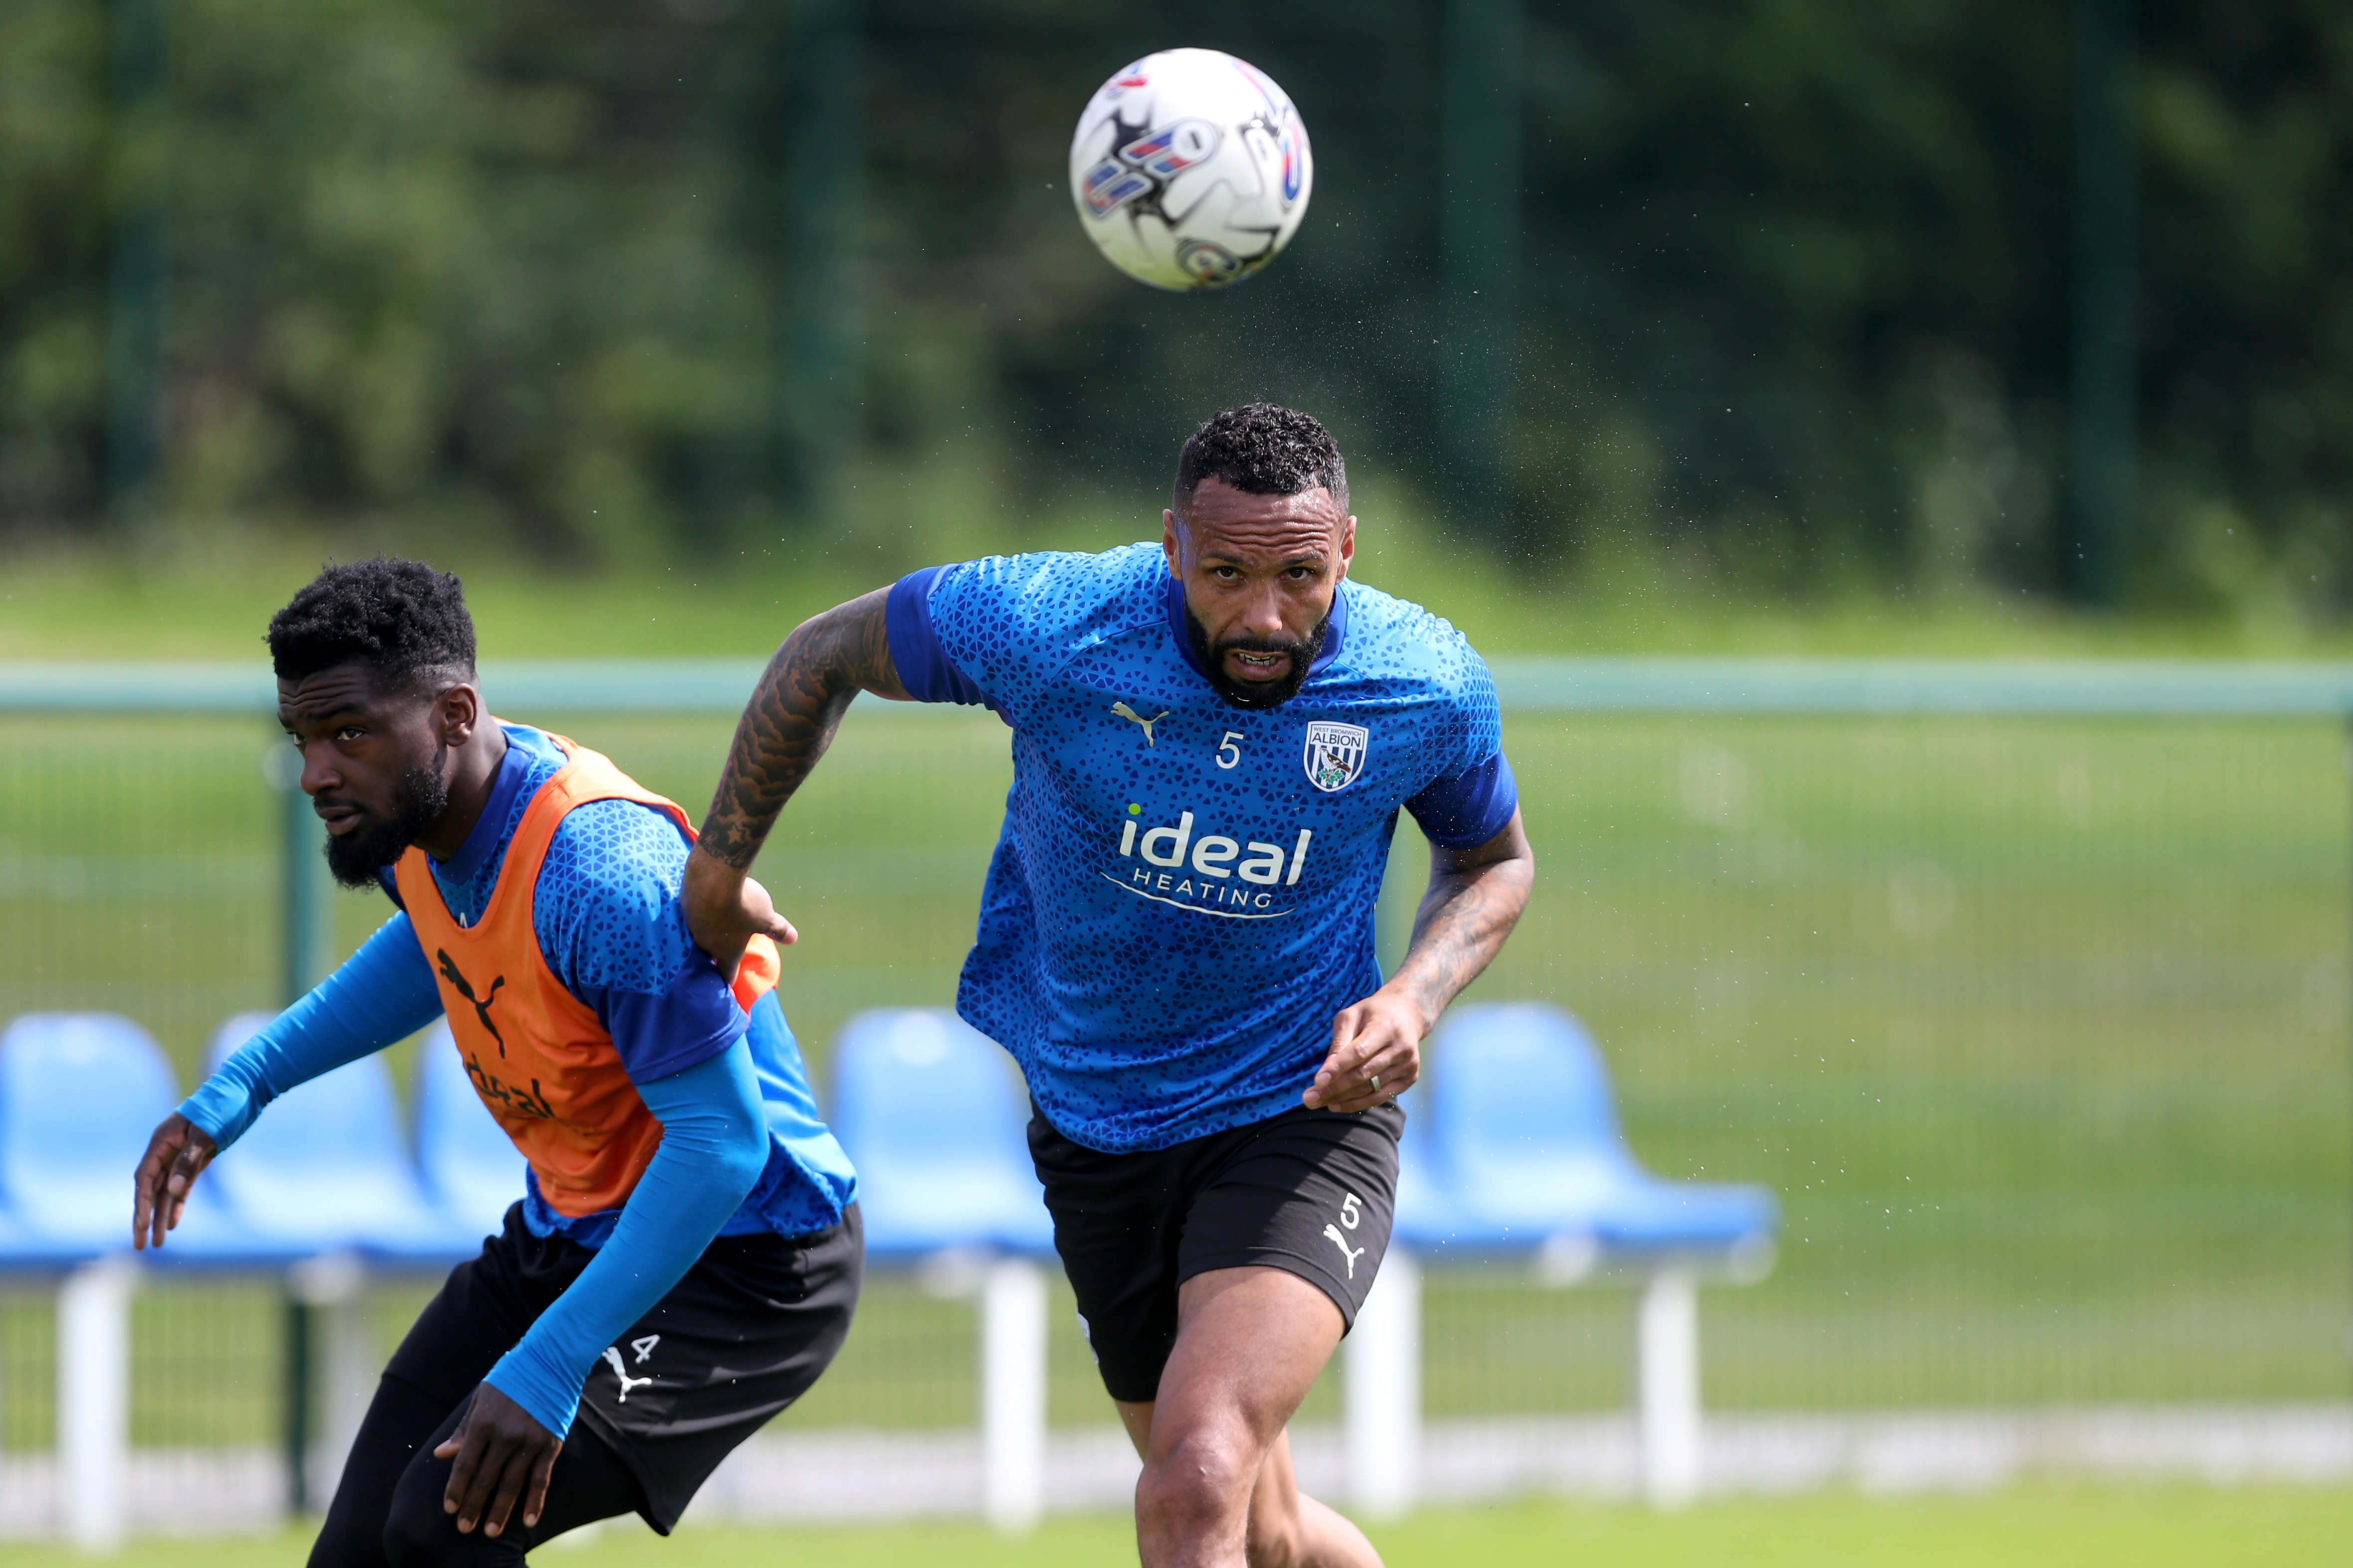 Kyle Bartley heading the ball during training